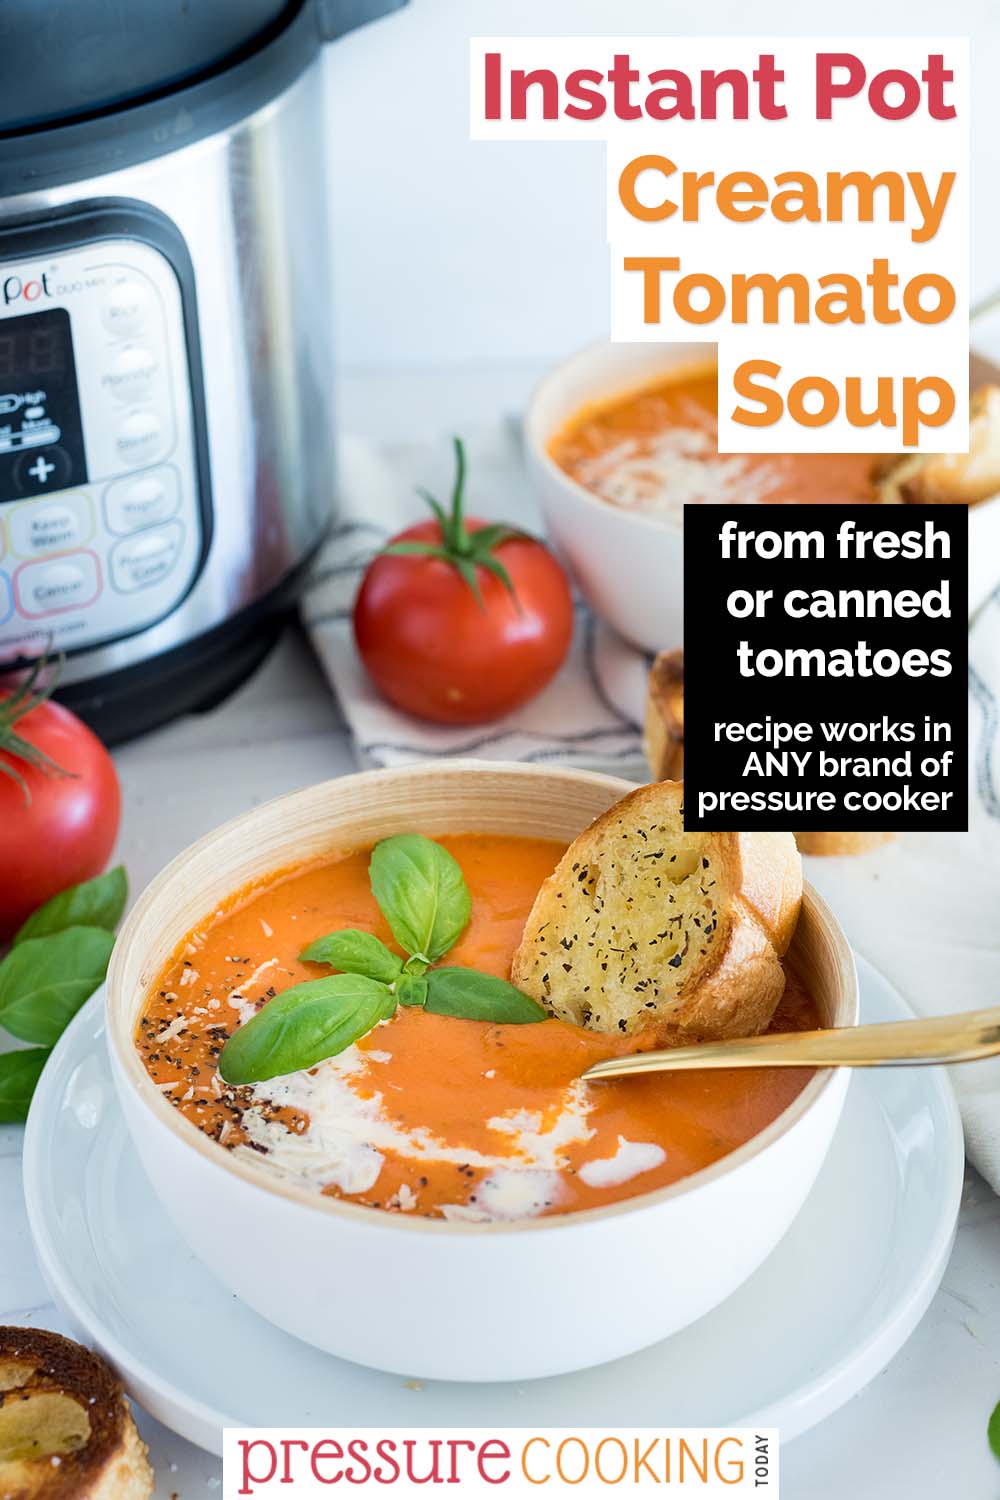 Pinterest button that reads "Instant Pot Creamy Tomato Soup: from fresh or canned tomatoes" over a 45 degree image of a white bowl filled with tomato basil soup, with an Instant Pot and fresh tomatoes in the background via @PressureCook2da